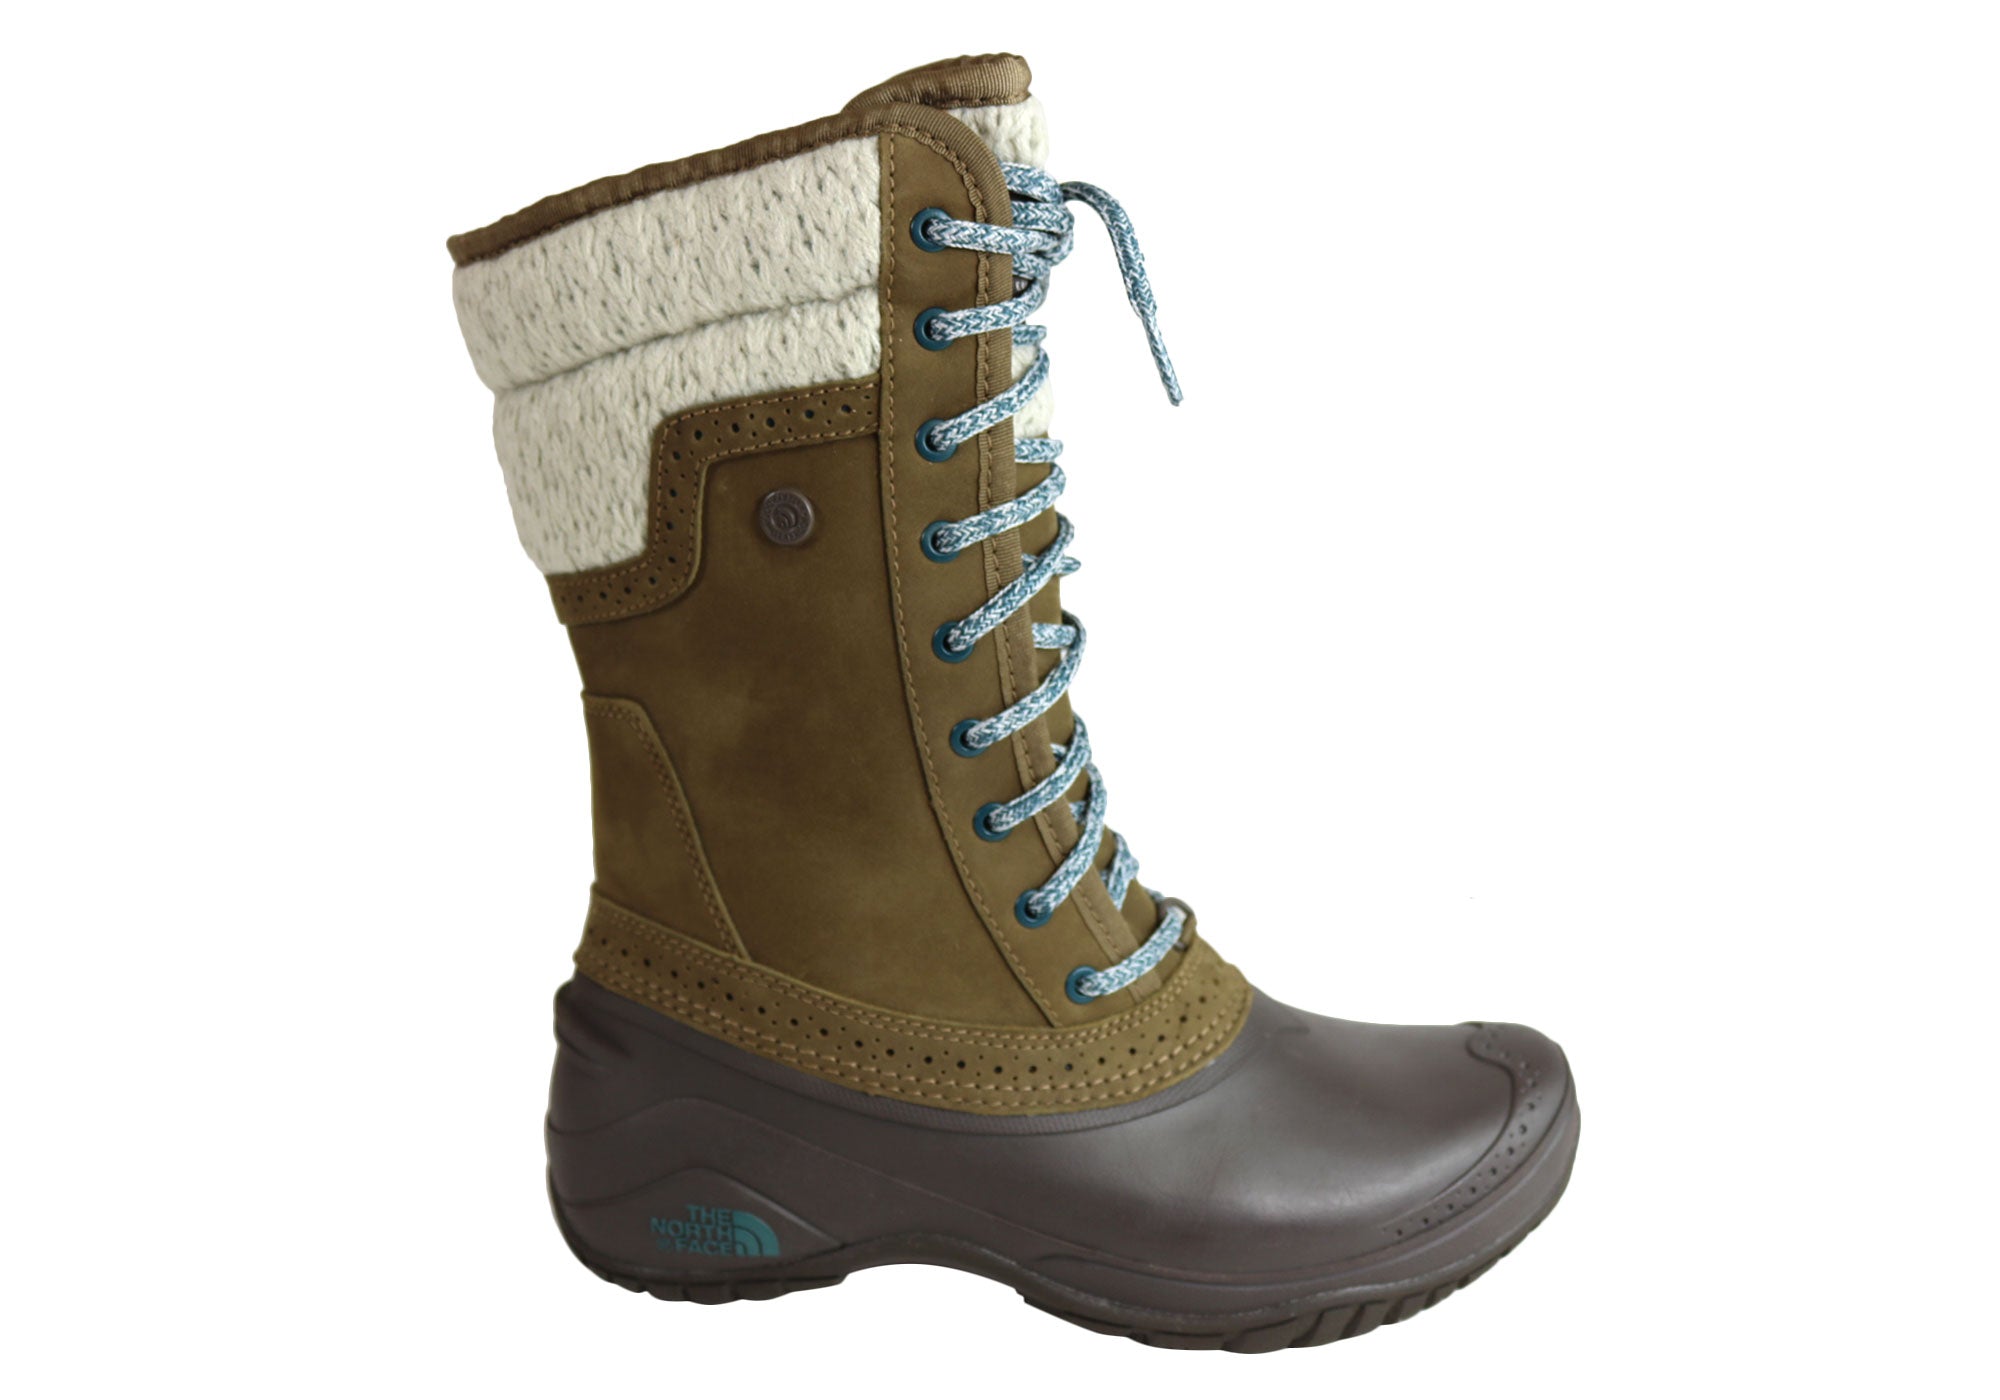 north face brown leather boots